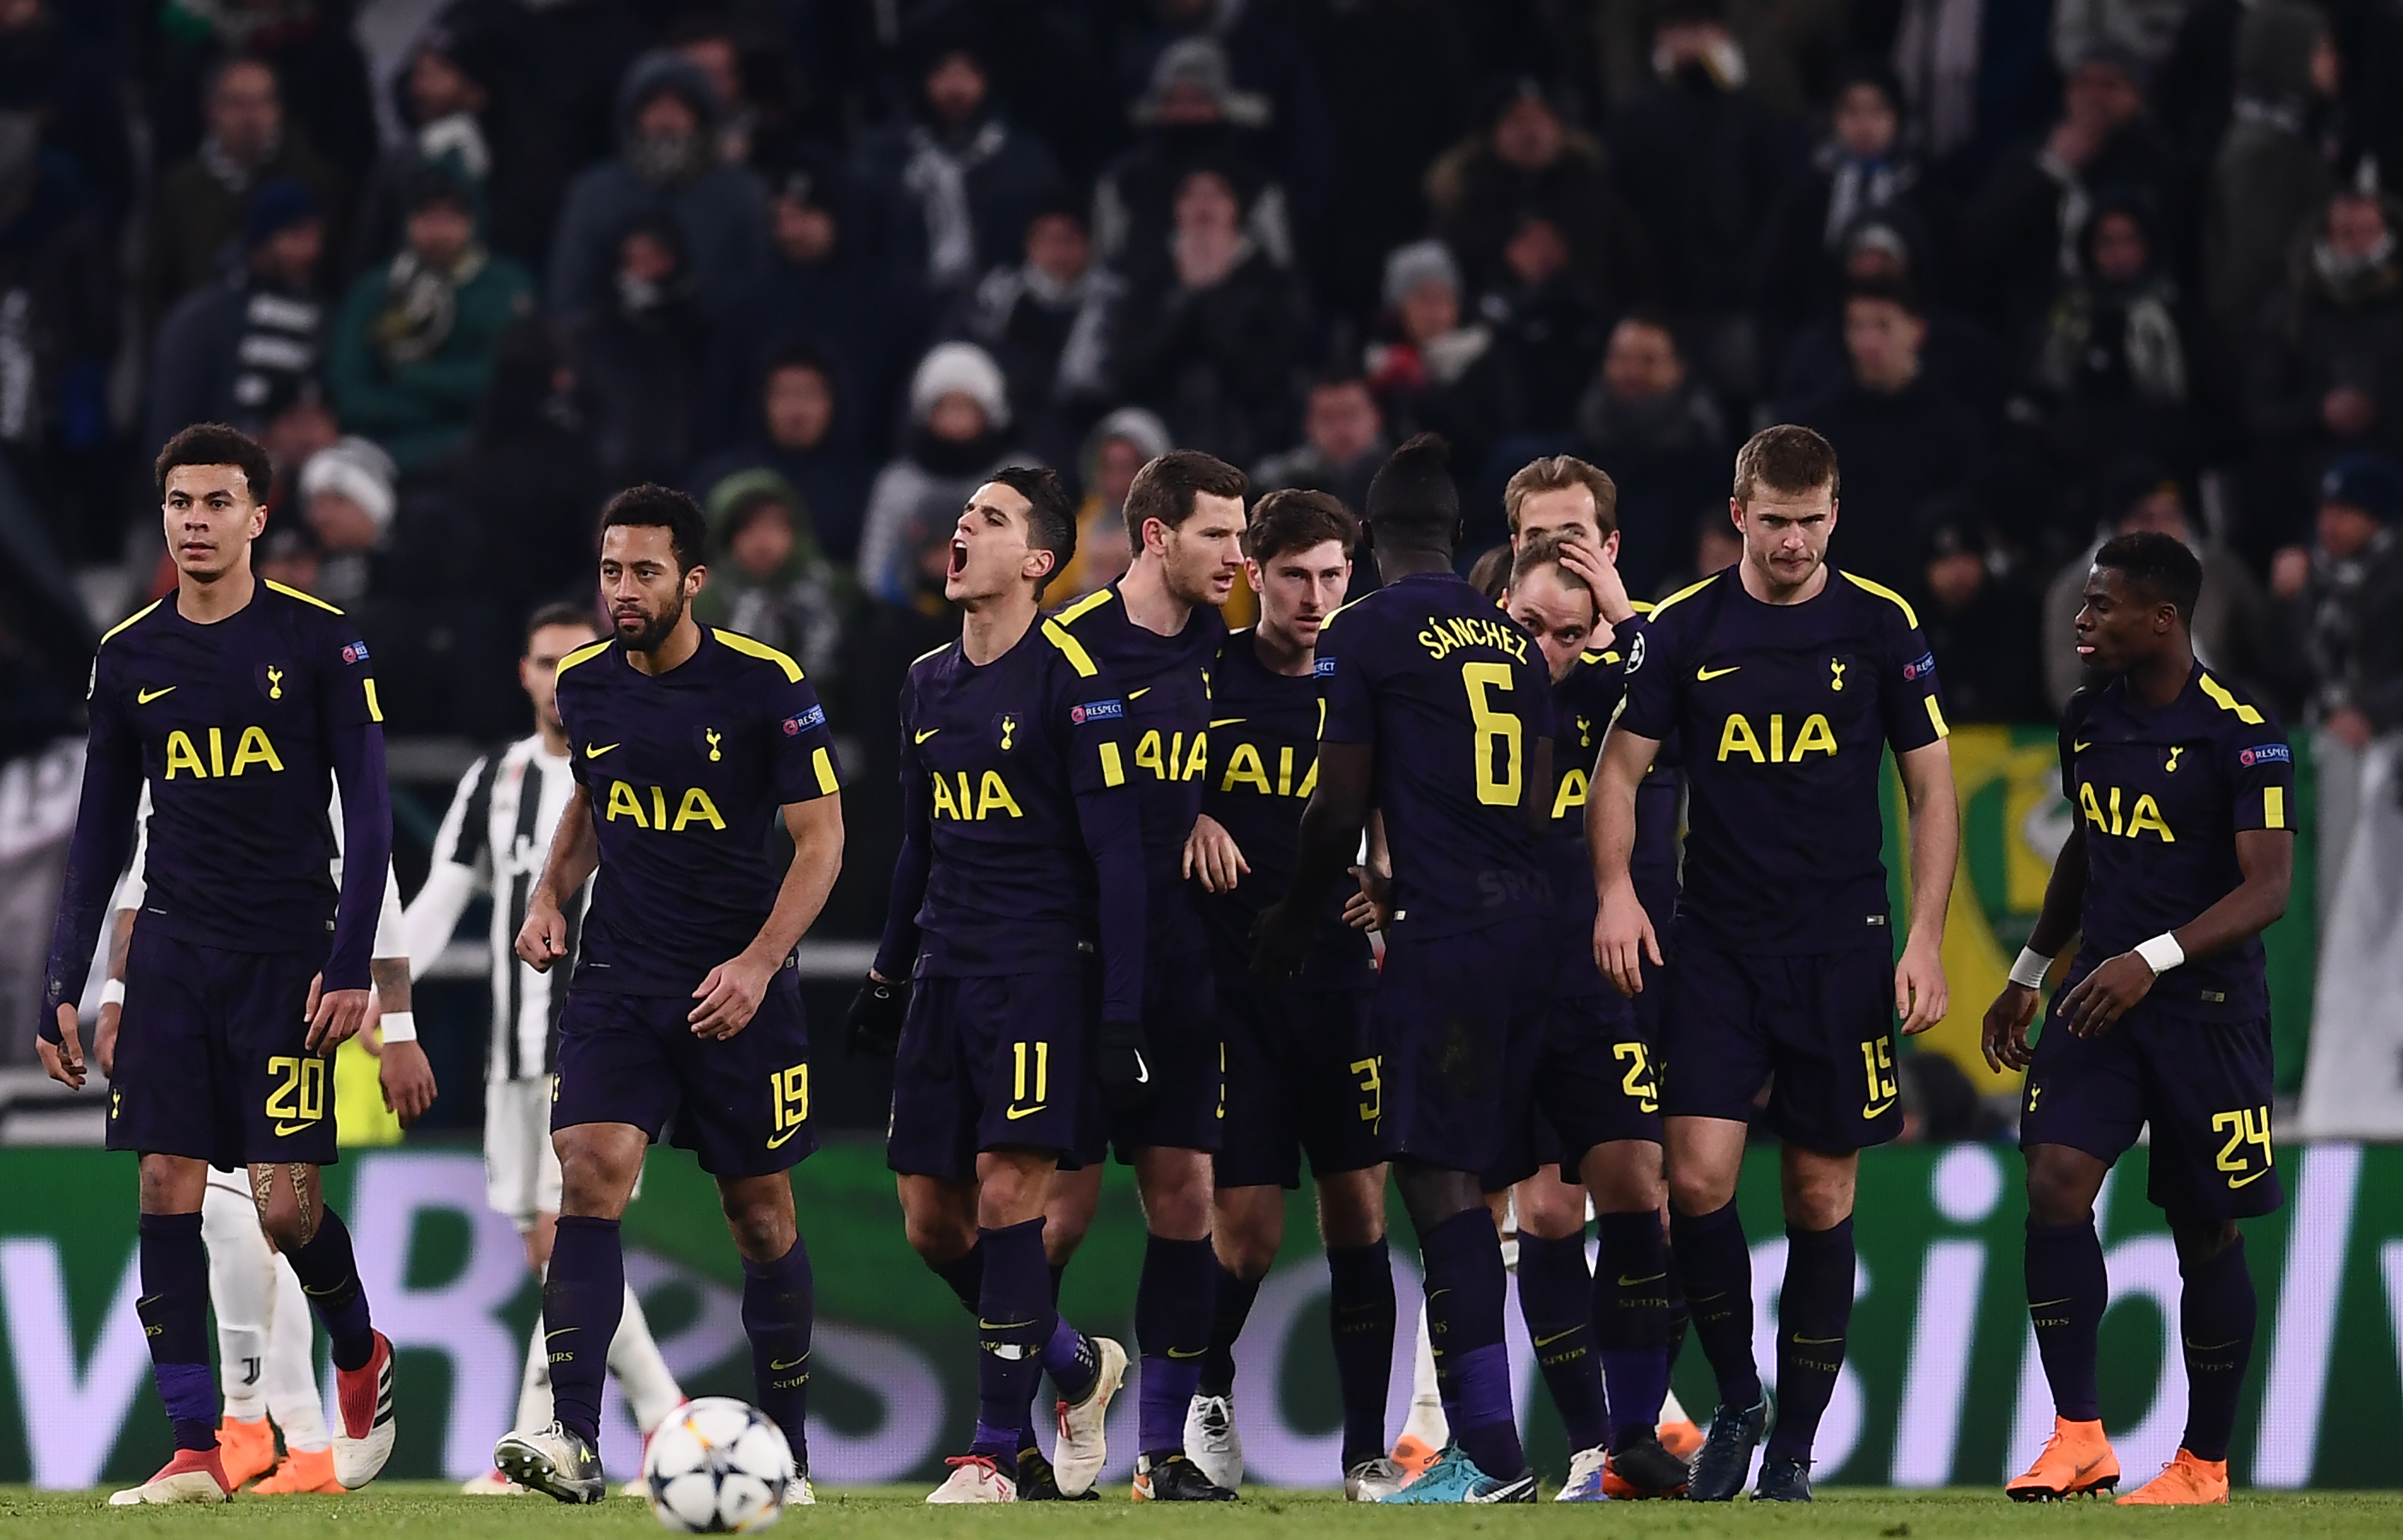 Tottenham Hotspur's Danish midfielder Christian Eriksen (4R) celebrates with teammates after scoring his team's second goal during the UEFA Champions League round of sixteen first leg football match between Juventus and Tottenham Hotspur at The Allianz Stadium in Turin on February 13, 2018.  / AFP PHOTO / Marco BERTORELLO        (Photo credit should read MARCO BERTORELLO/AFP/Getty Images)